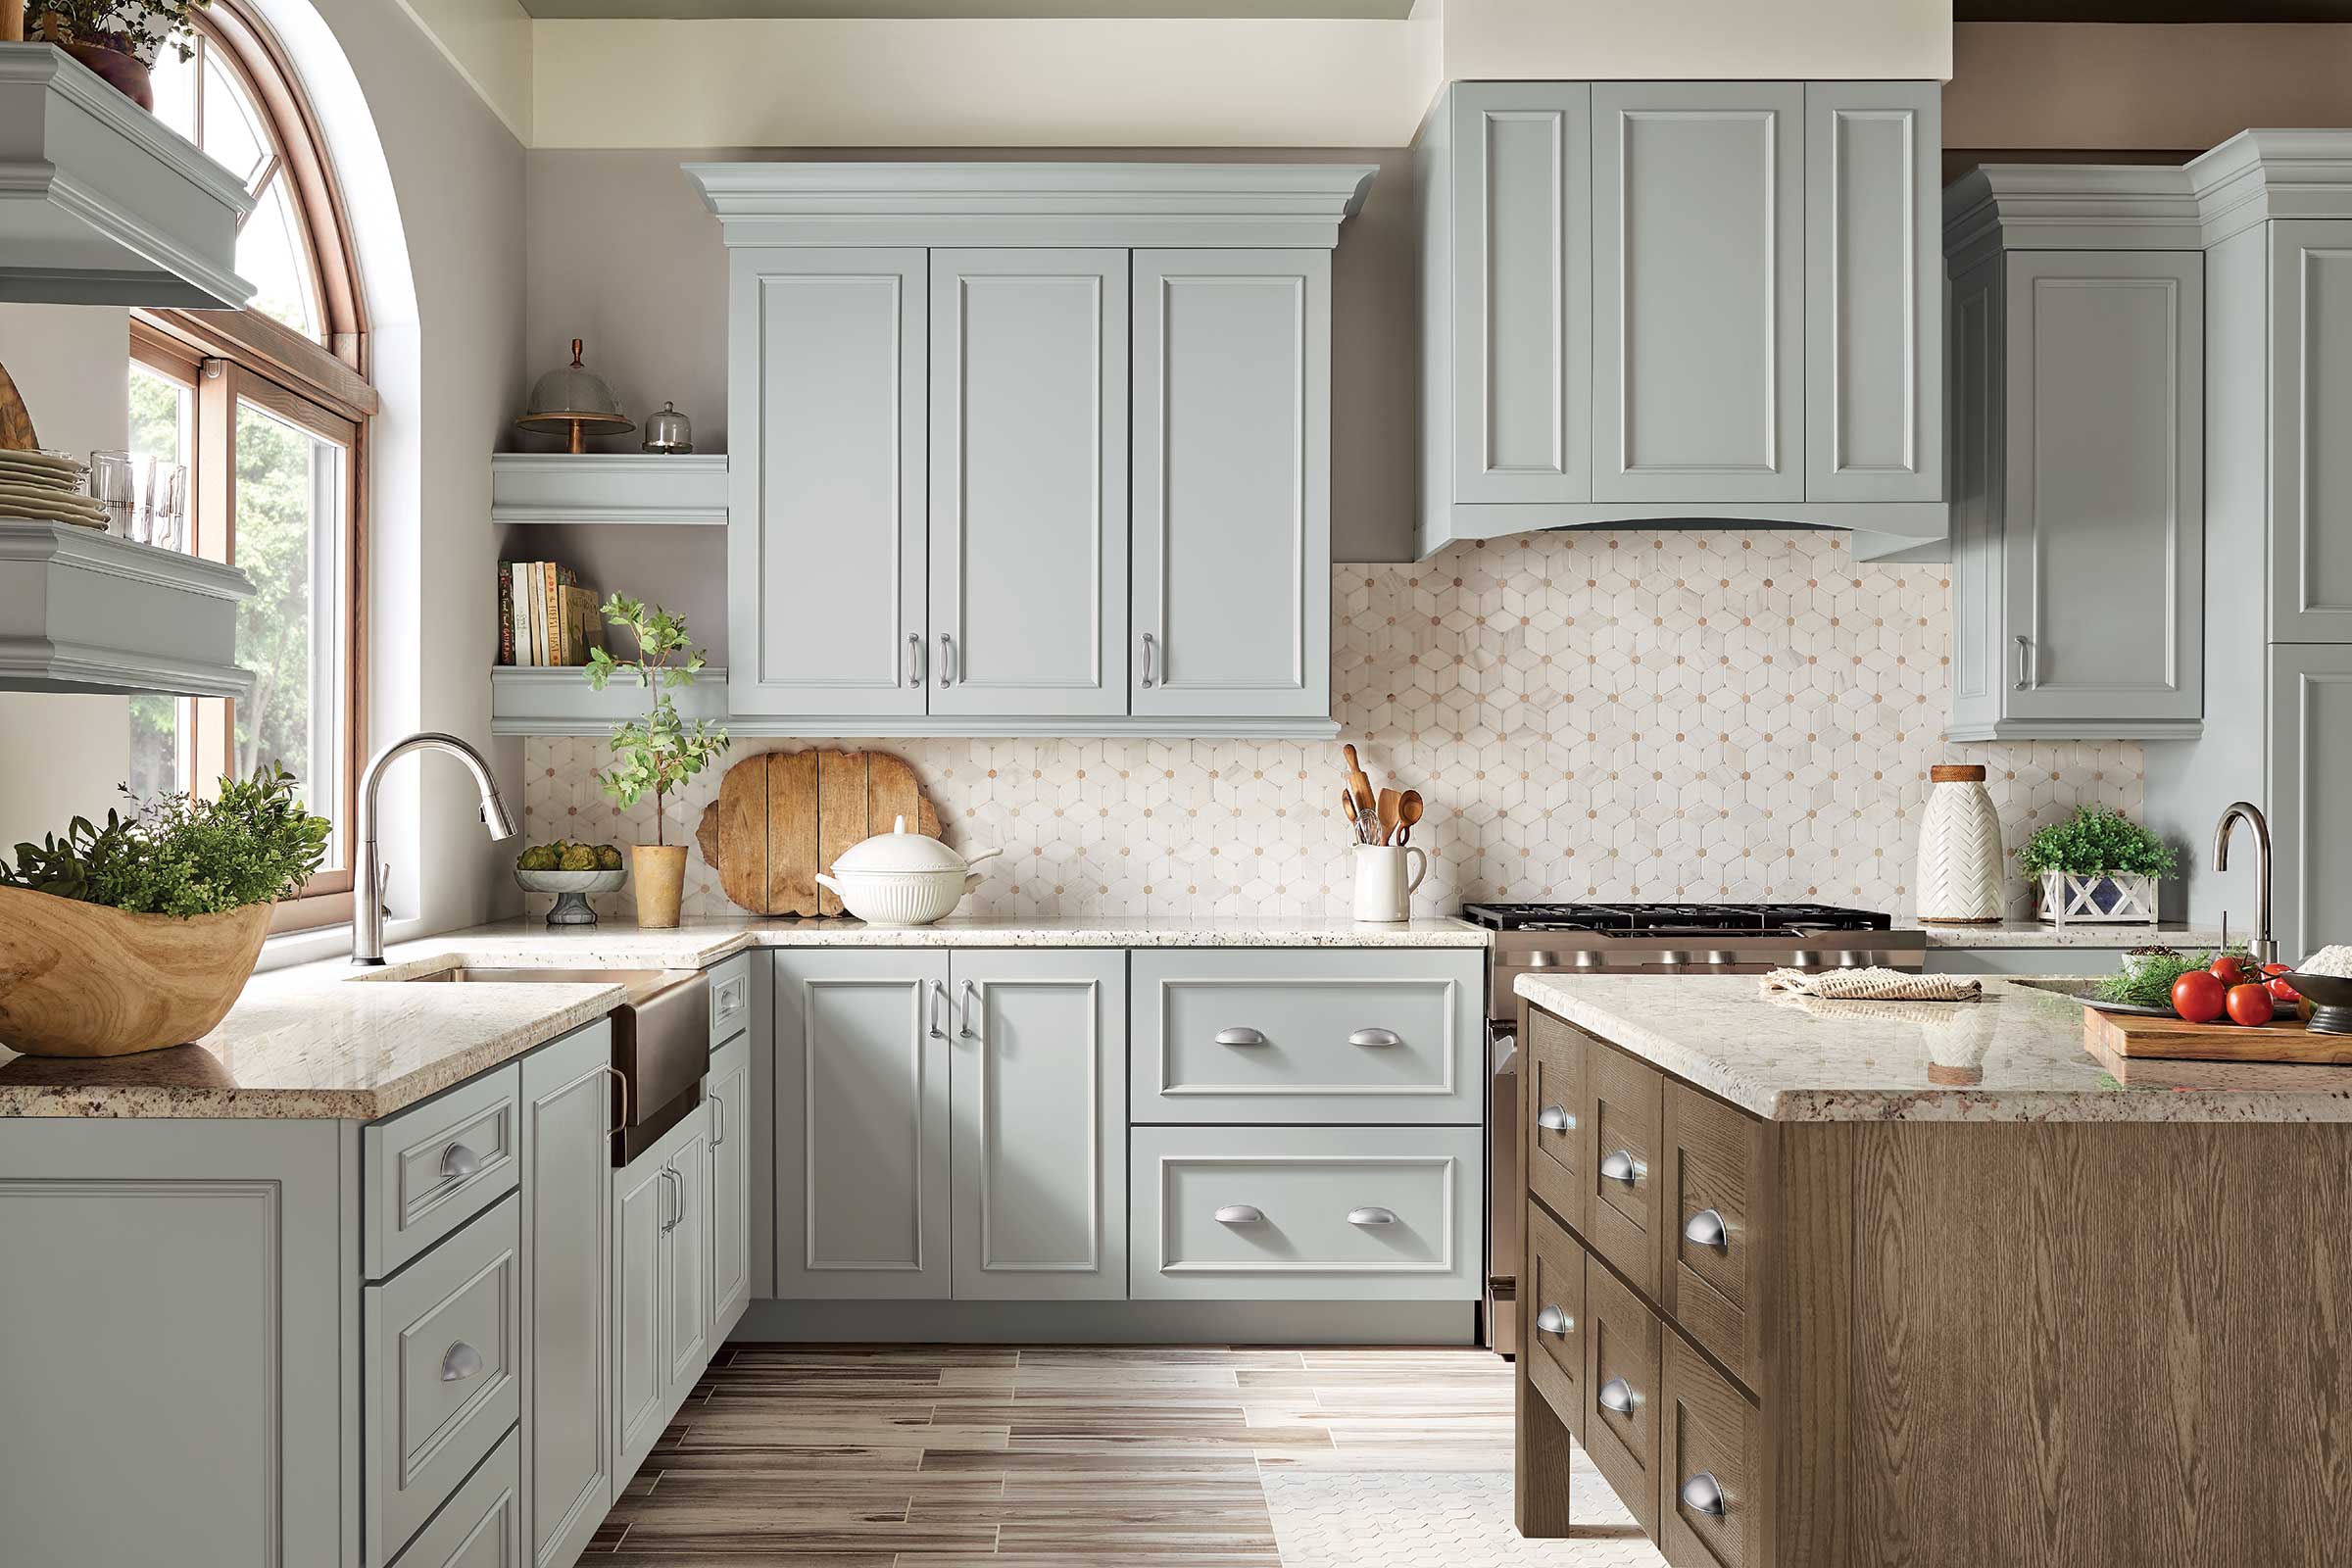 Kitchen Color Schemes, How To Choose Your Kitchen Colors